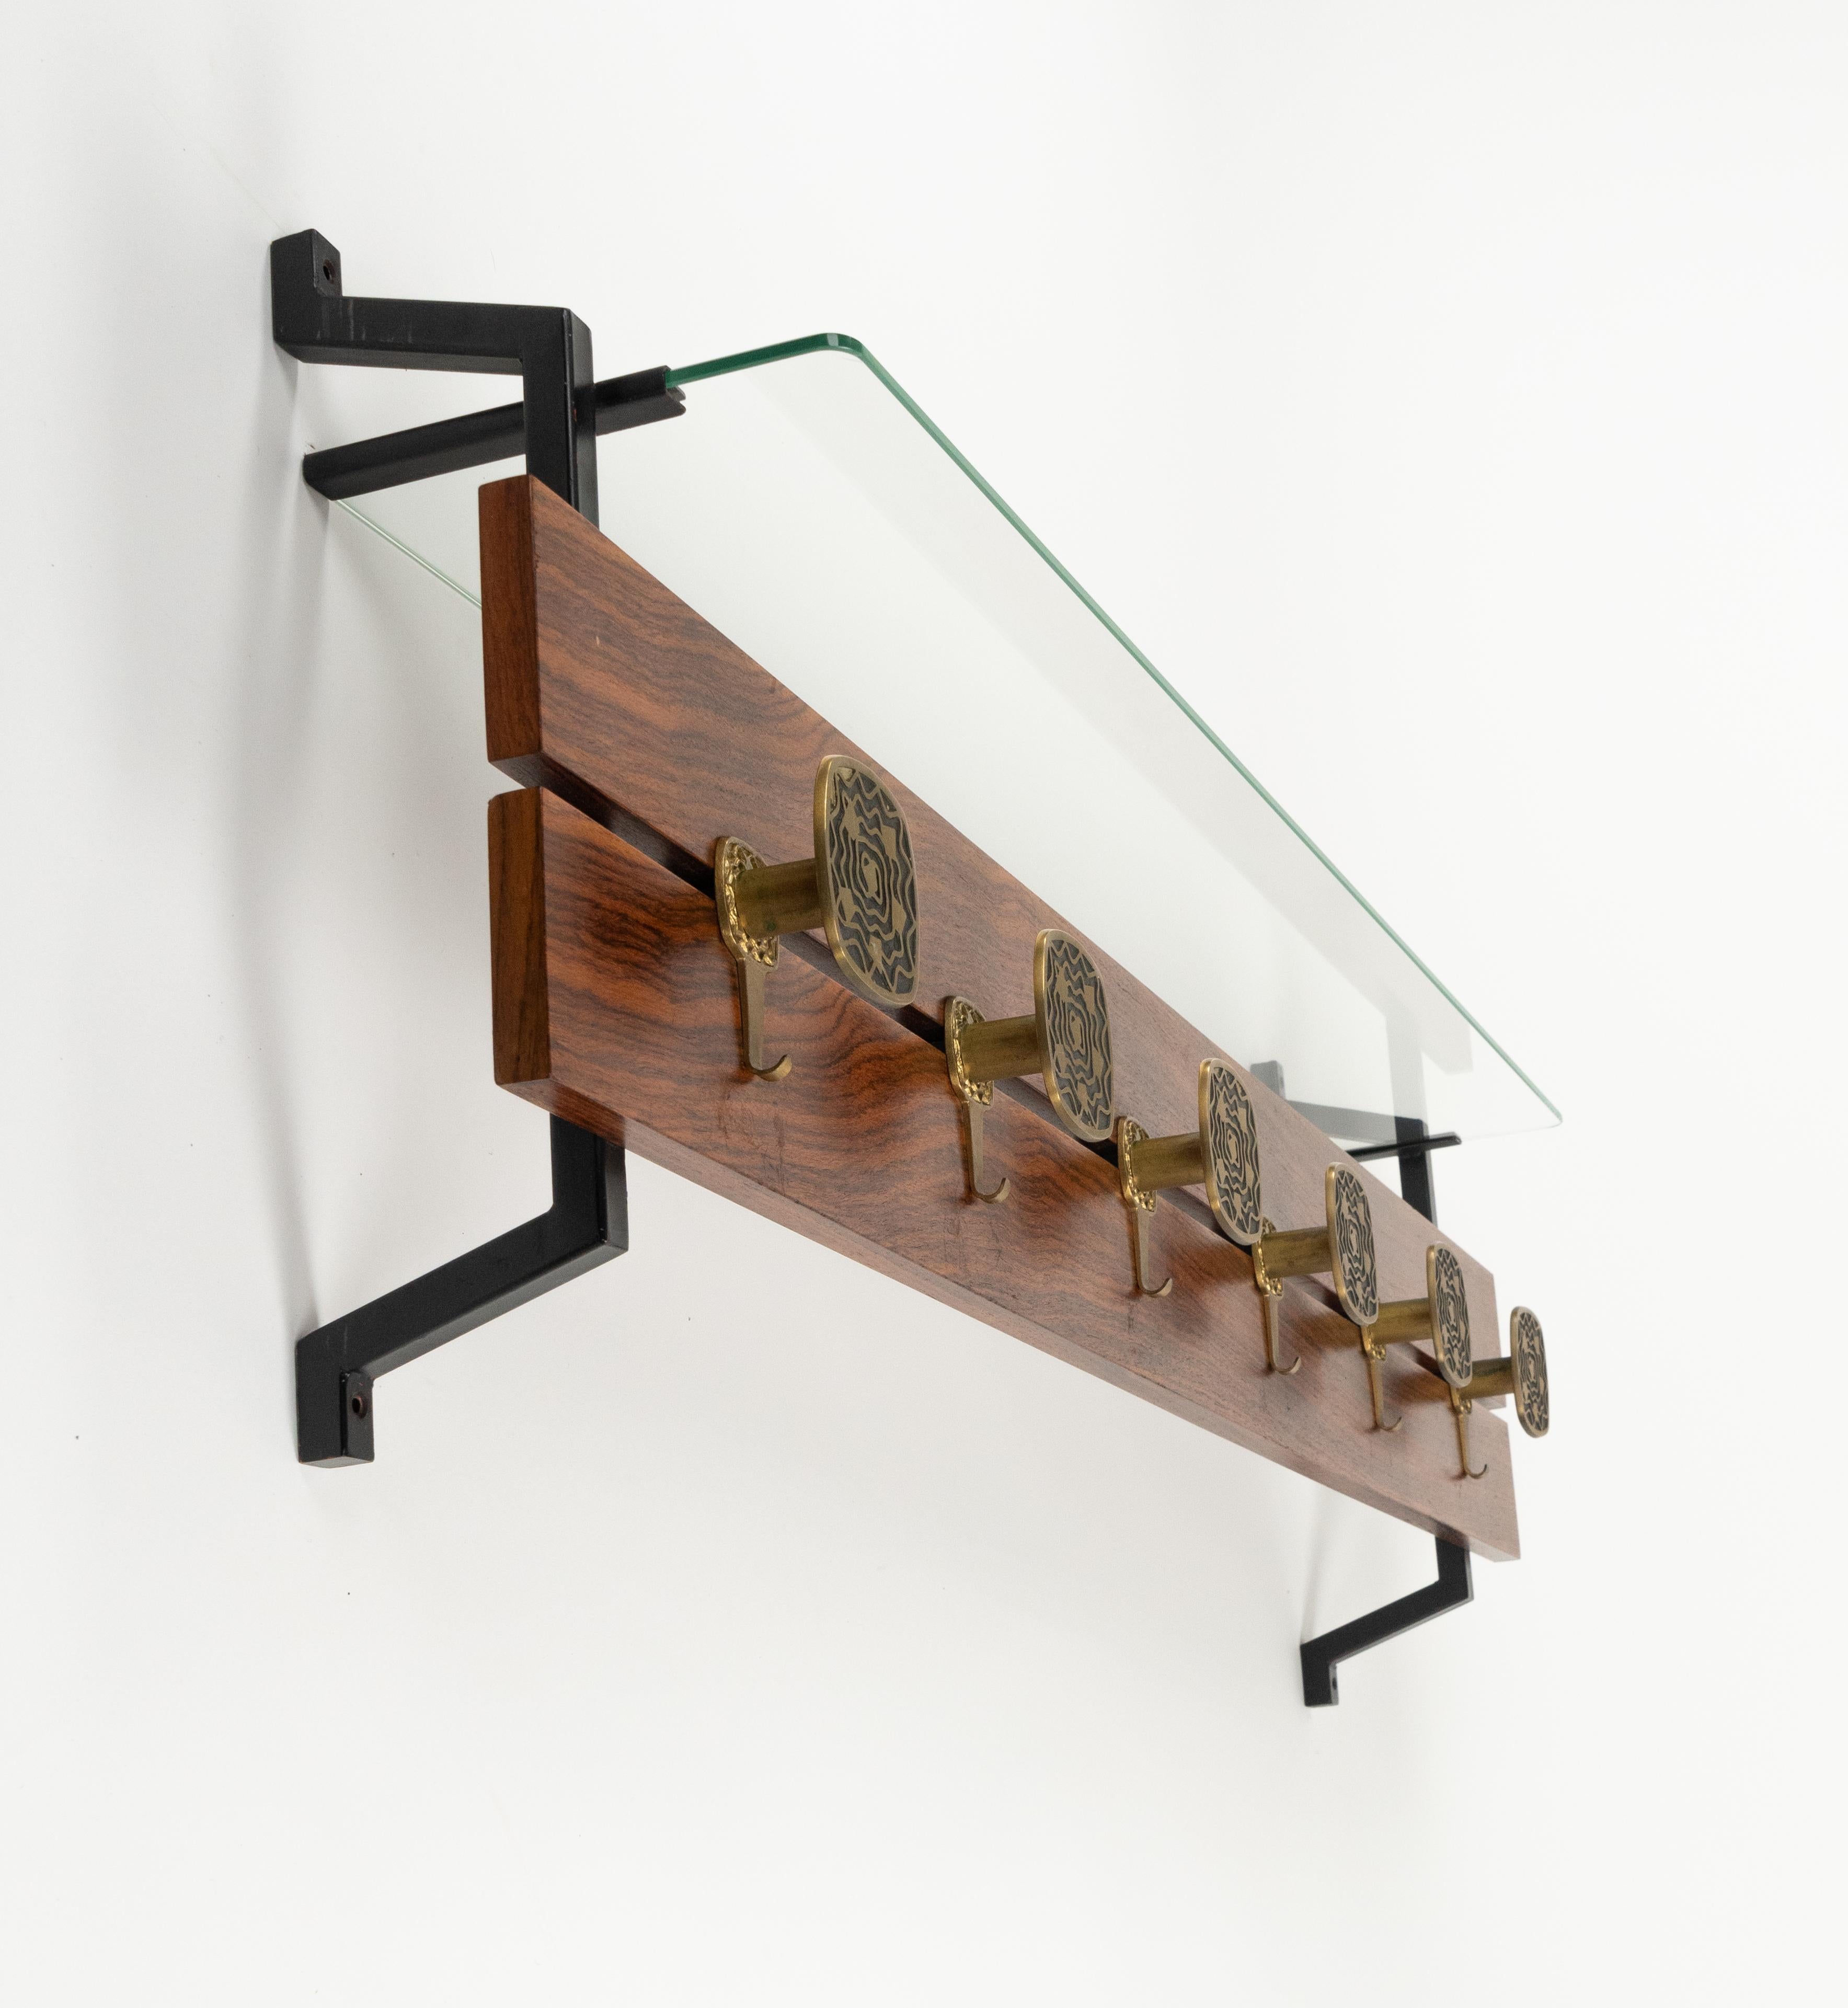 Midcentury Wood, Glass and Brass Coat Rack Herta Baller Style, Italy 1970s In Good Condition For Sale In Rome, IT